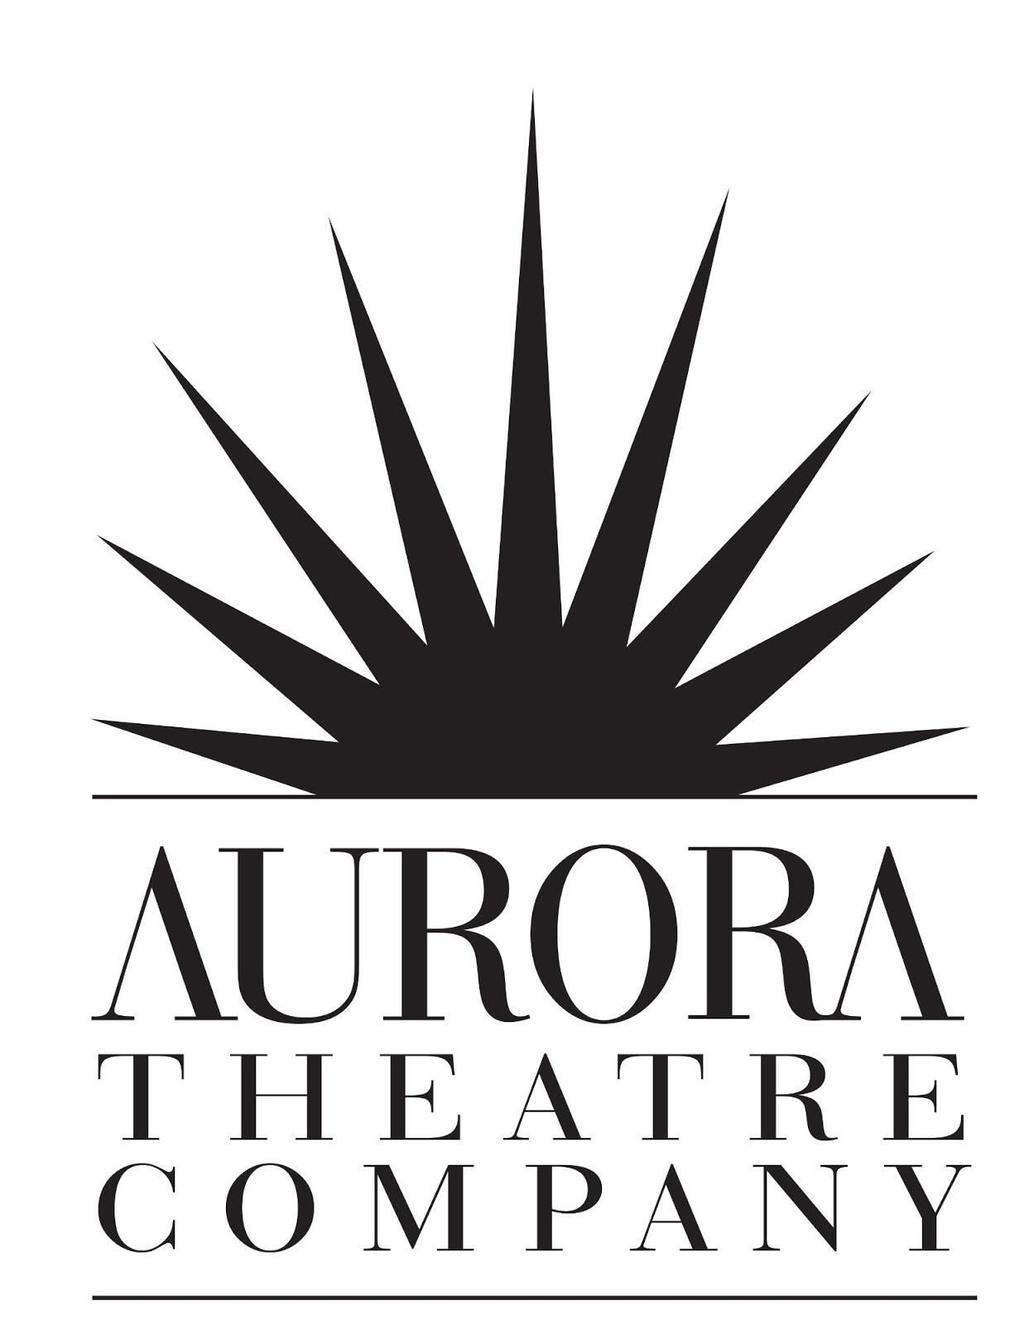 FOR IMMEDIATE RELEASE AURORA THEATRE COMPANY ANNOUNCES 2018/2019 SEASON Acclaimed intimate theatre to present from Joan Didion West Coast premiere from Jonathan Safran Foer from Dominique Morisseau